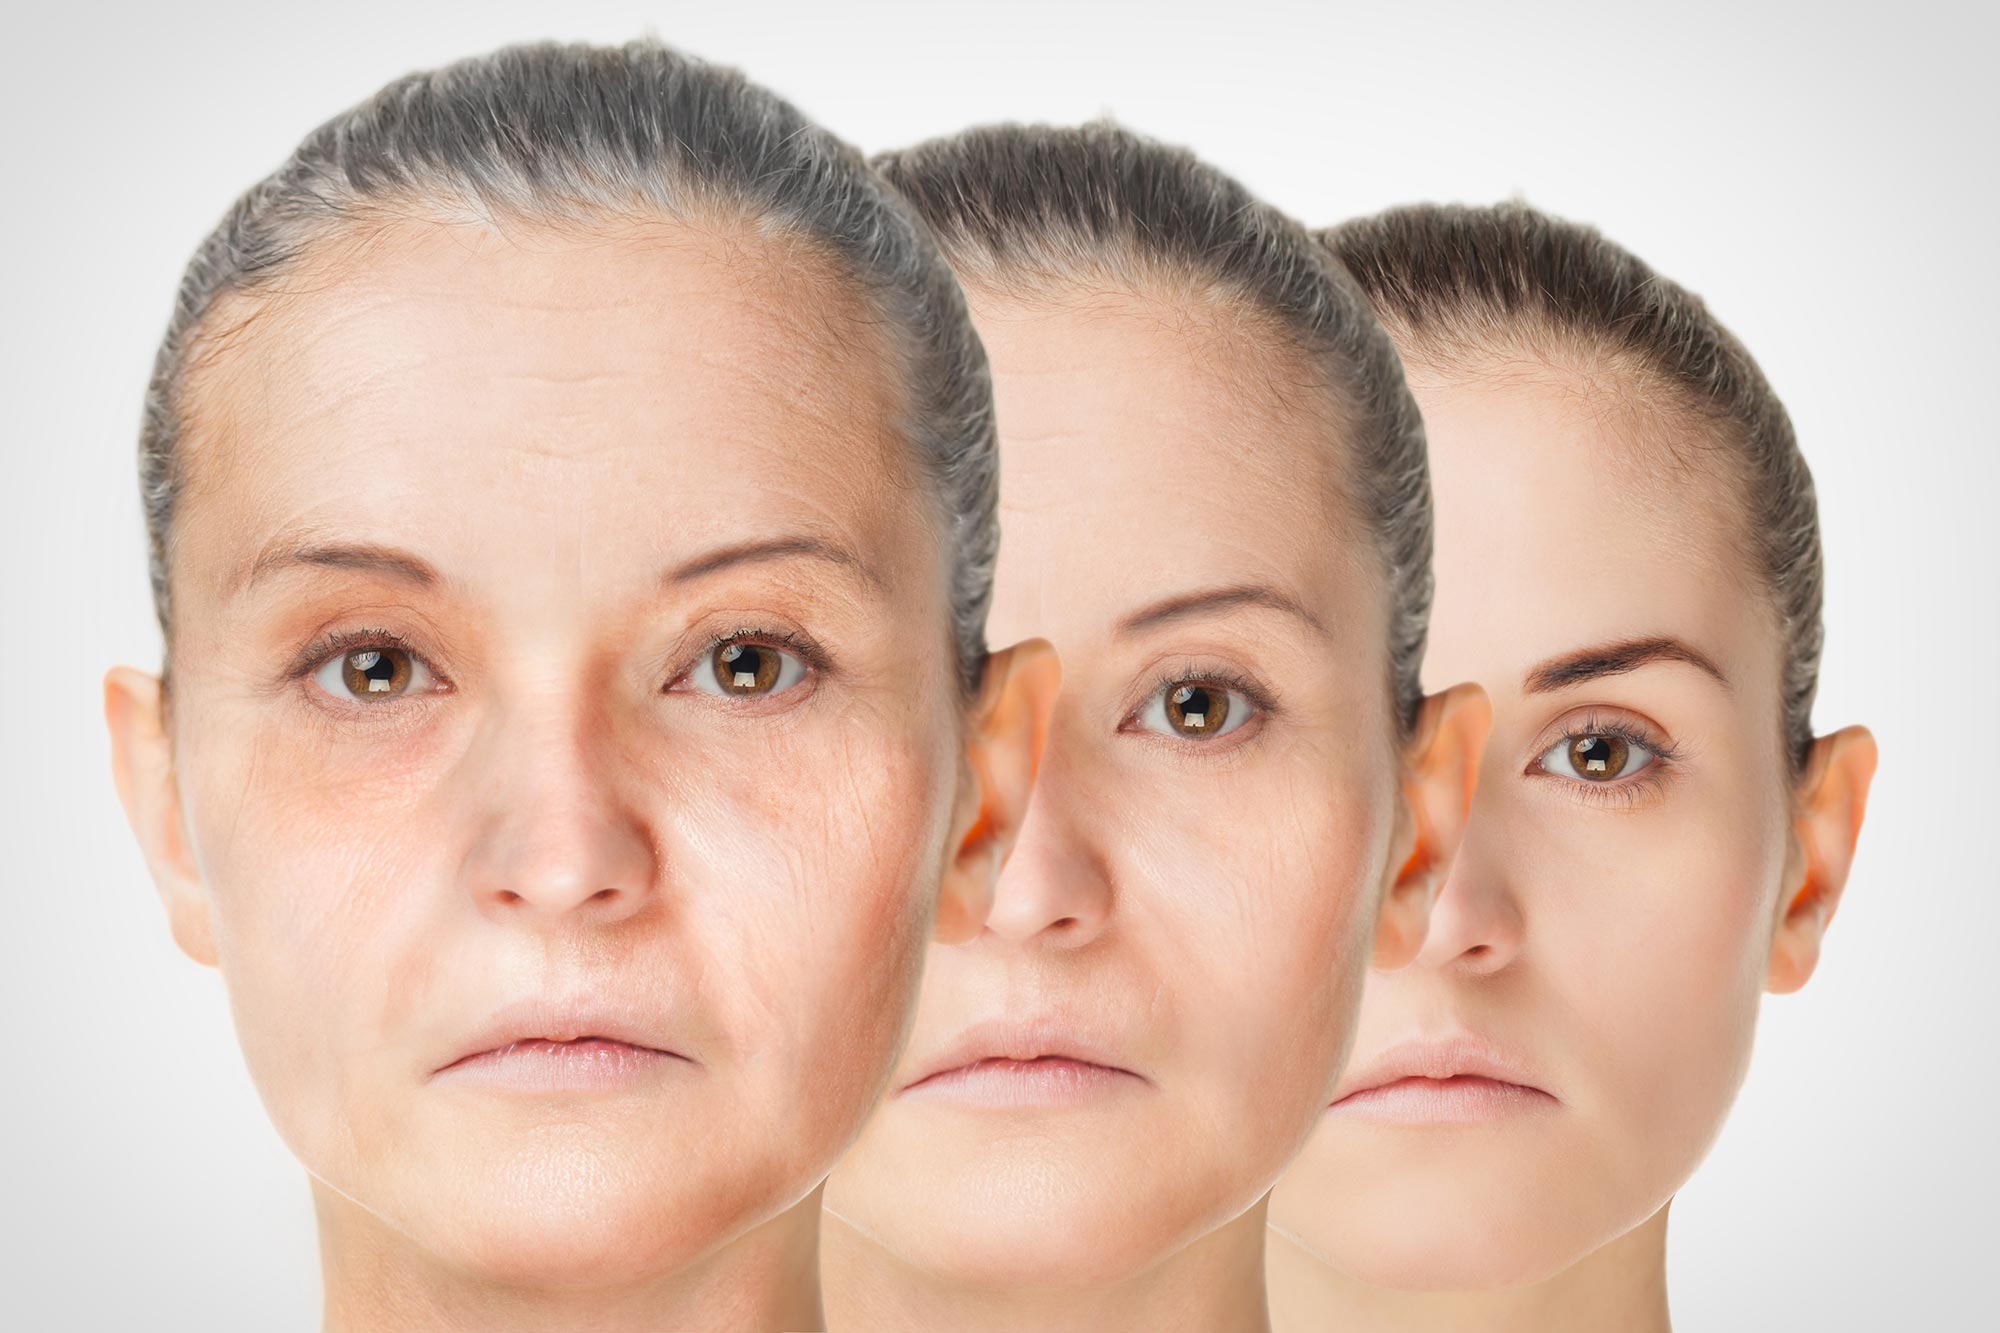 Cellular Rejuvenation Therapy Safely Reverses the Aging Process in Mice